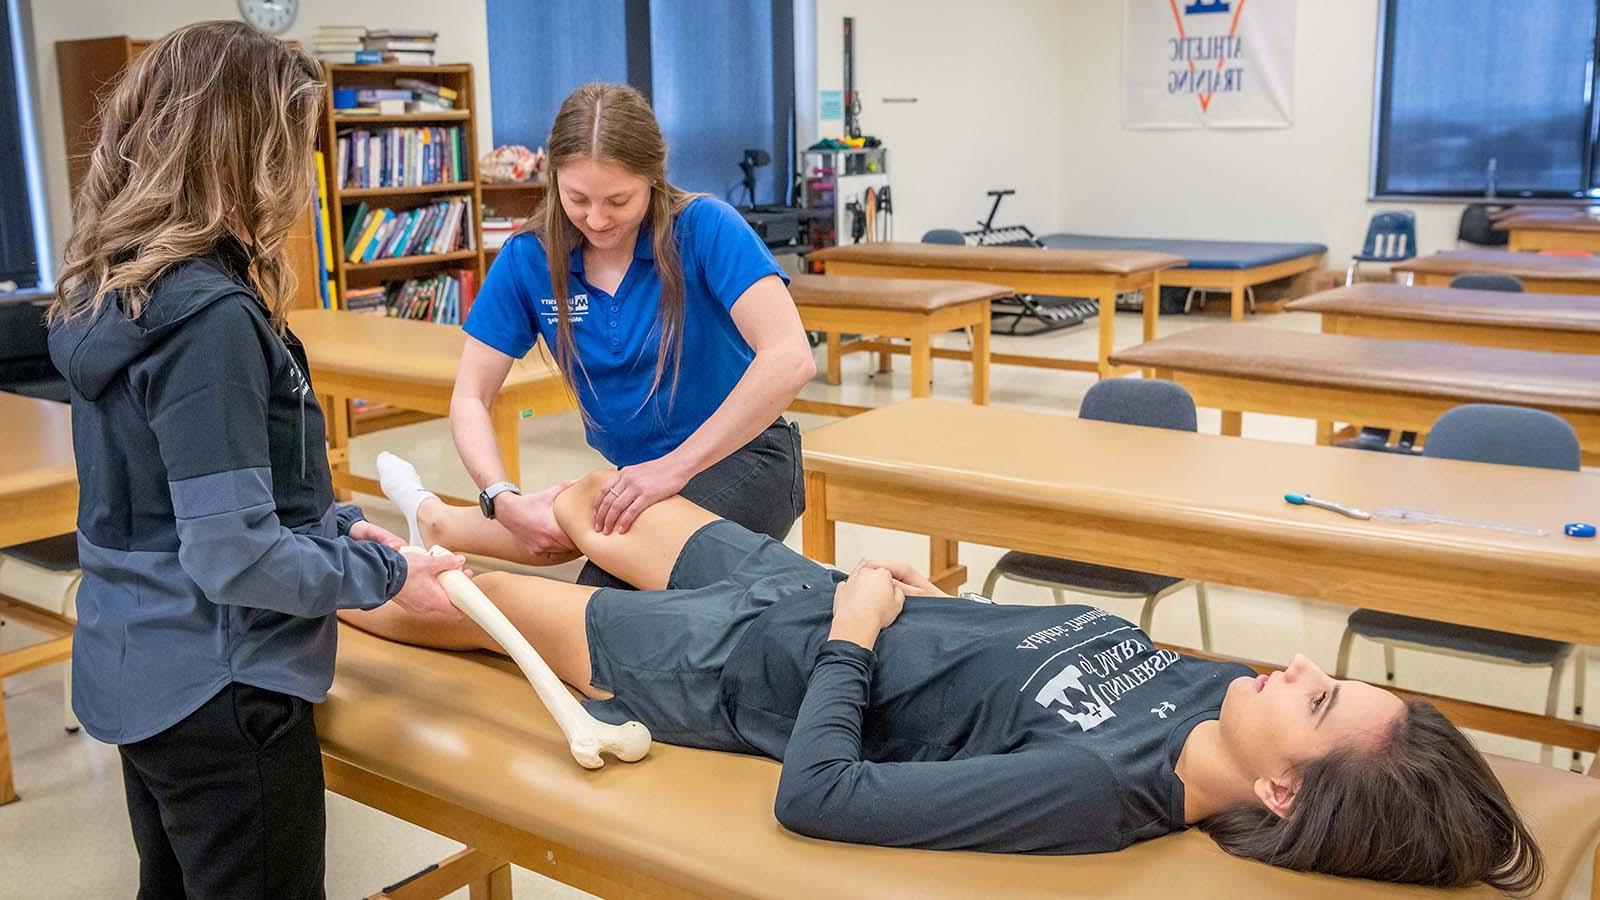 Athletic training student completing an assessment on athlete’s knee while instructor is watching